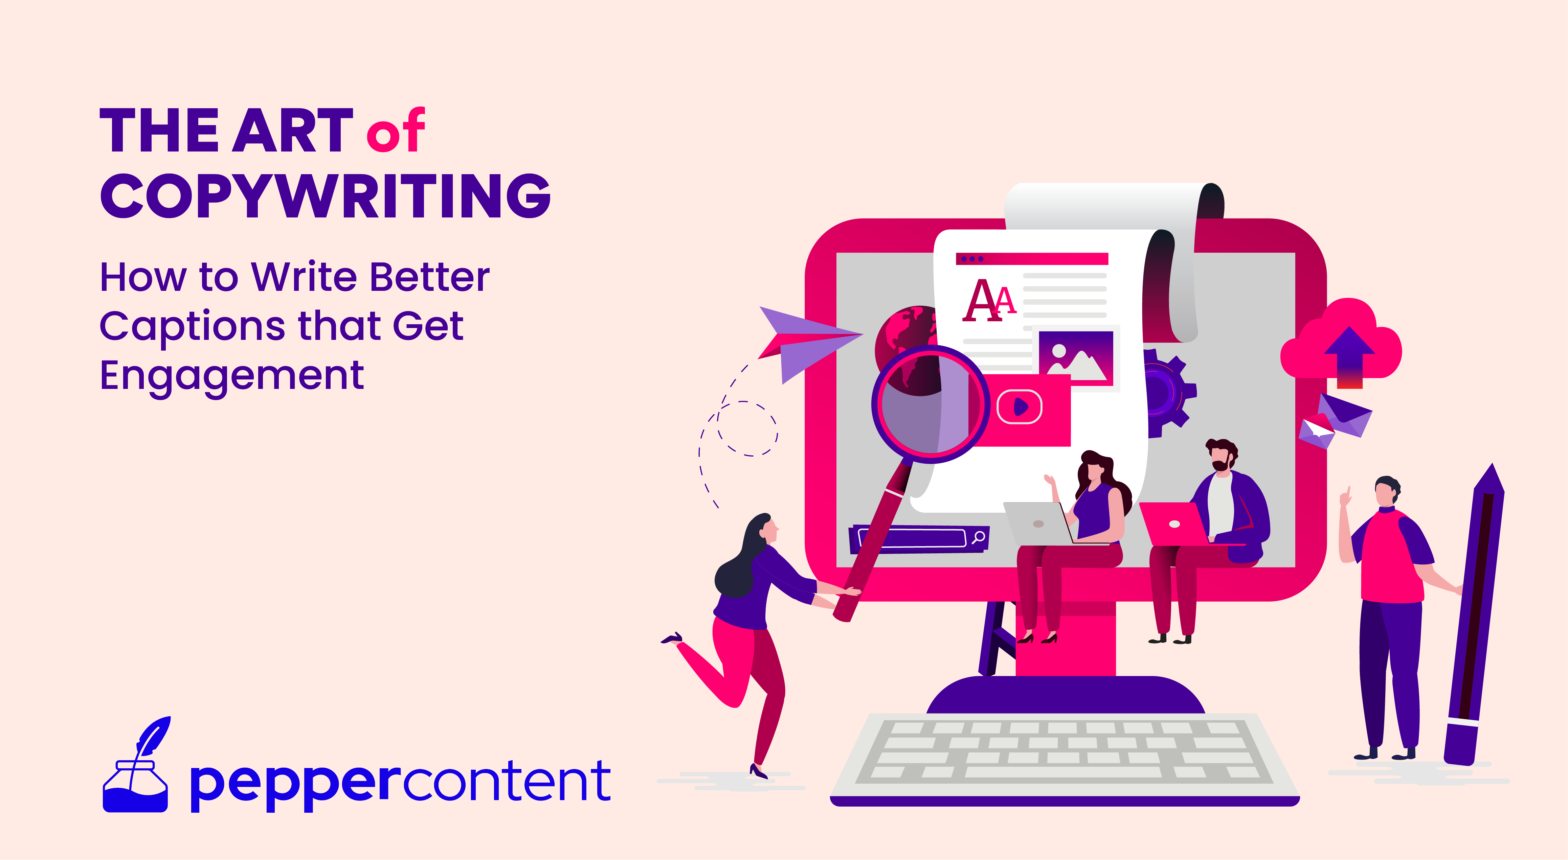 The Art of Copywriting: How to Write Better Captions that Get Engagement